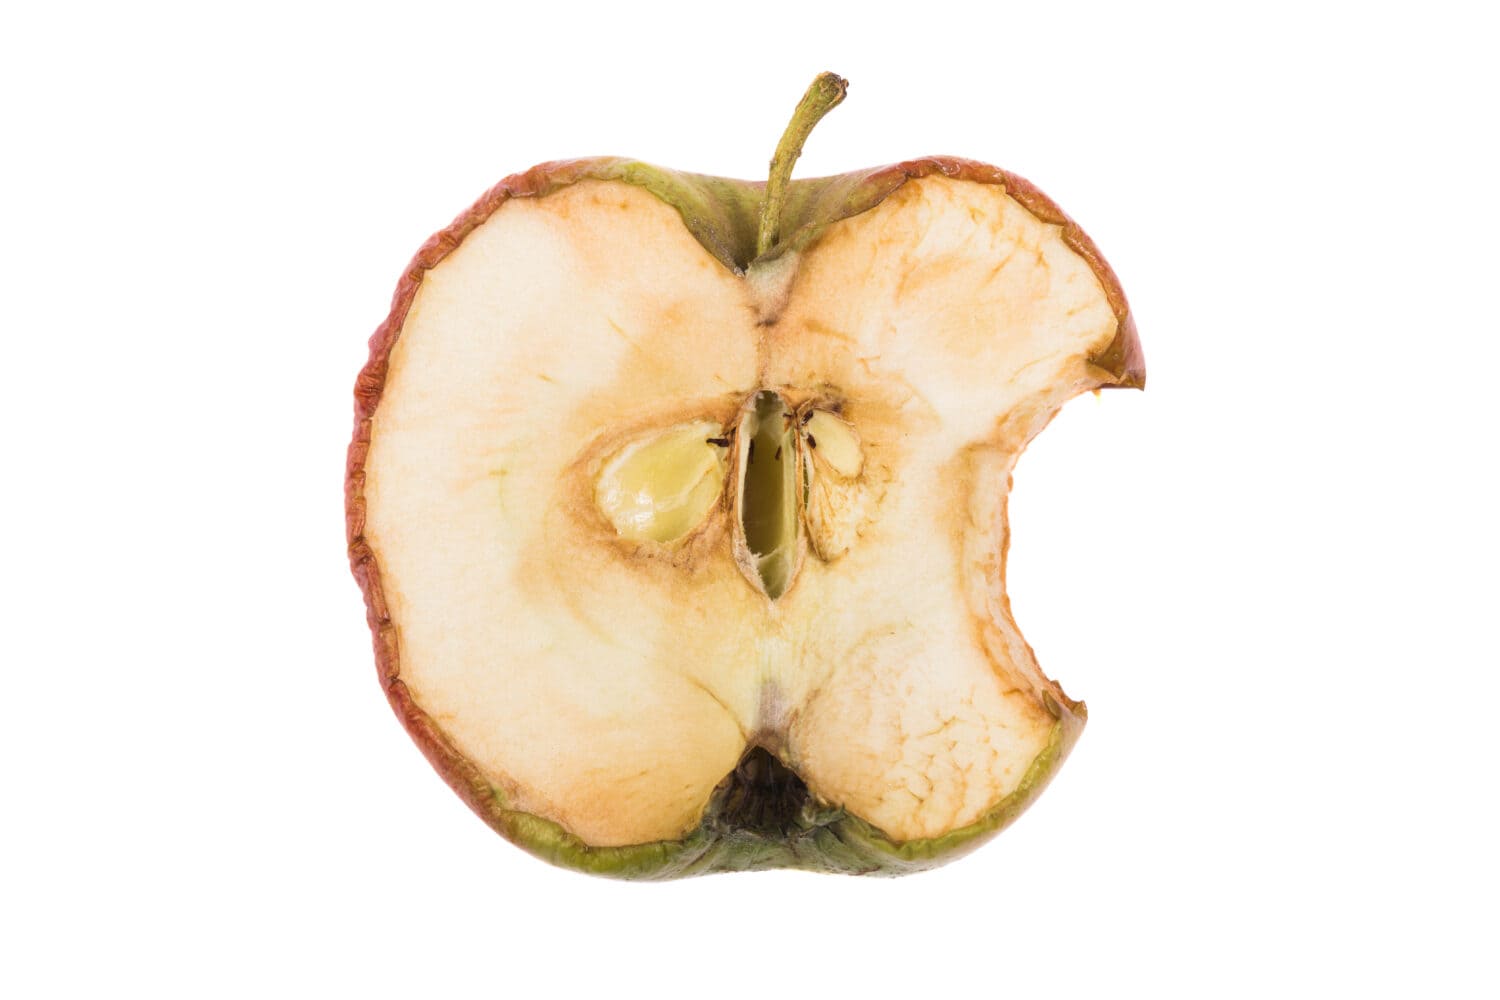 A half old apple bitten photographed on white background.